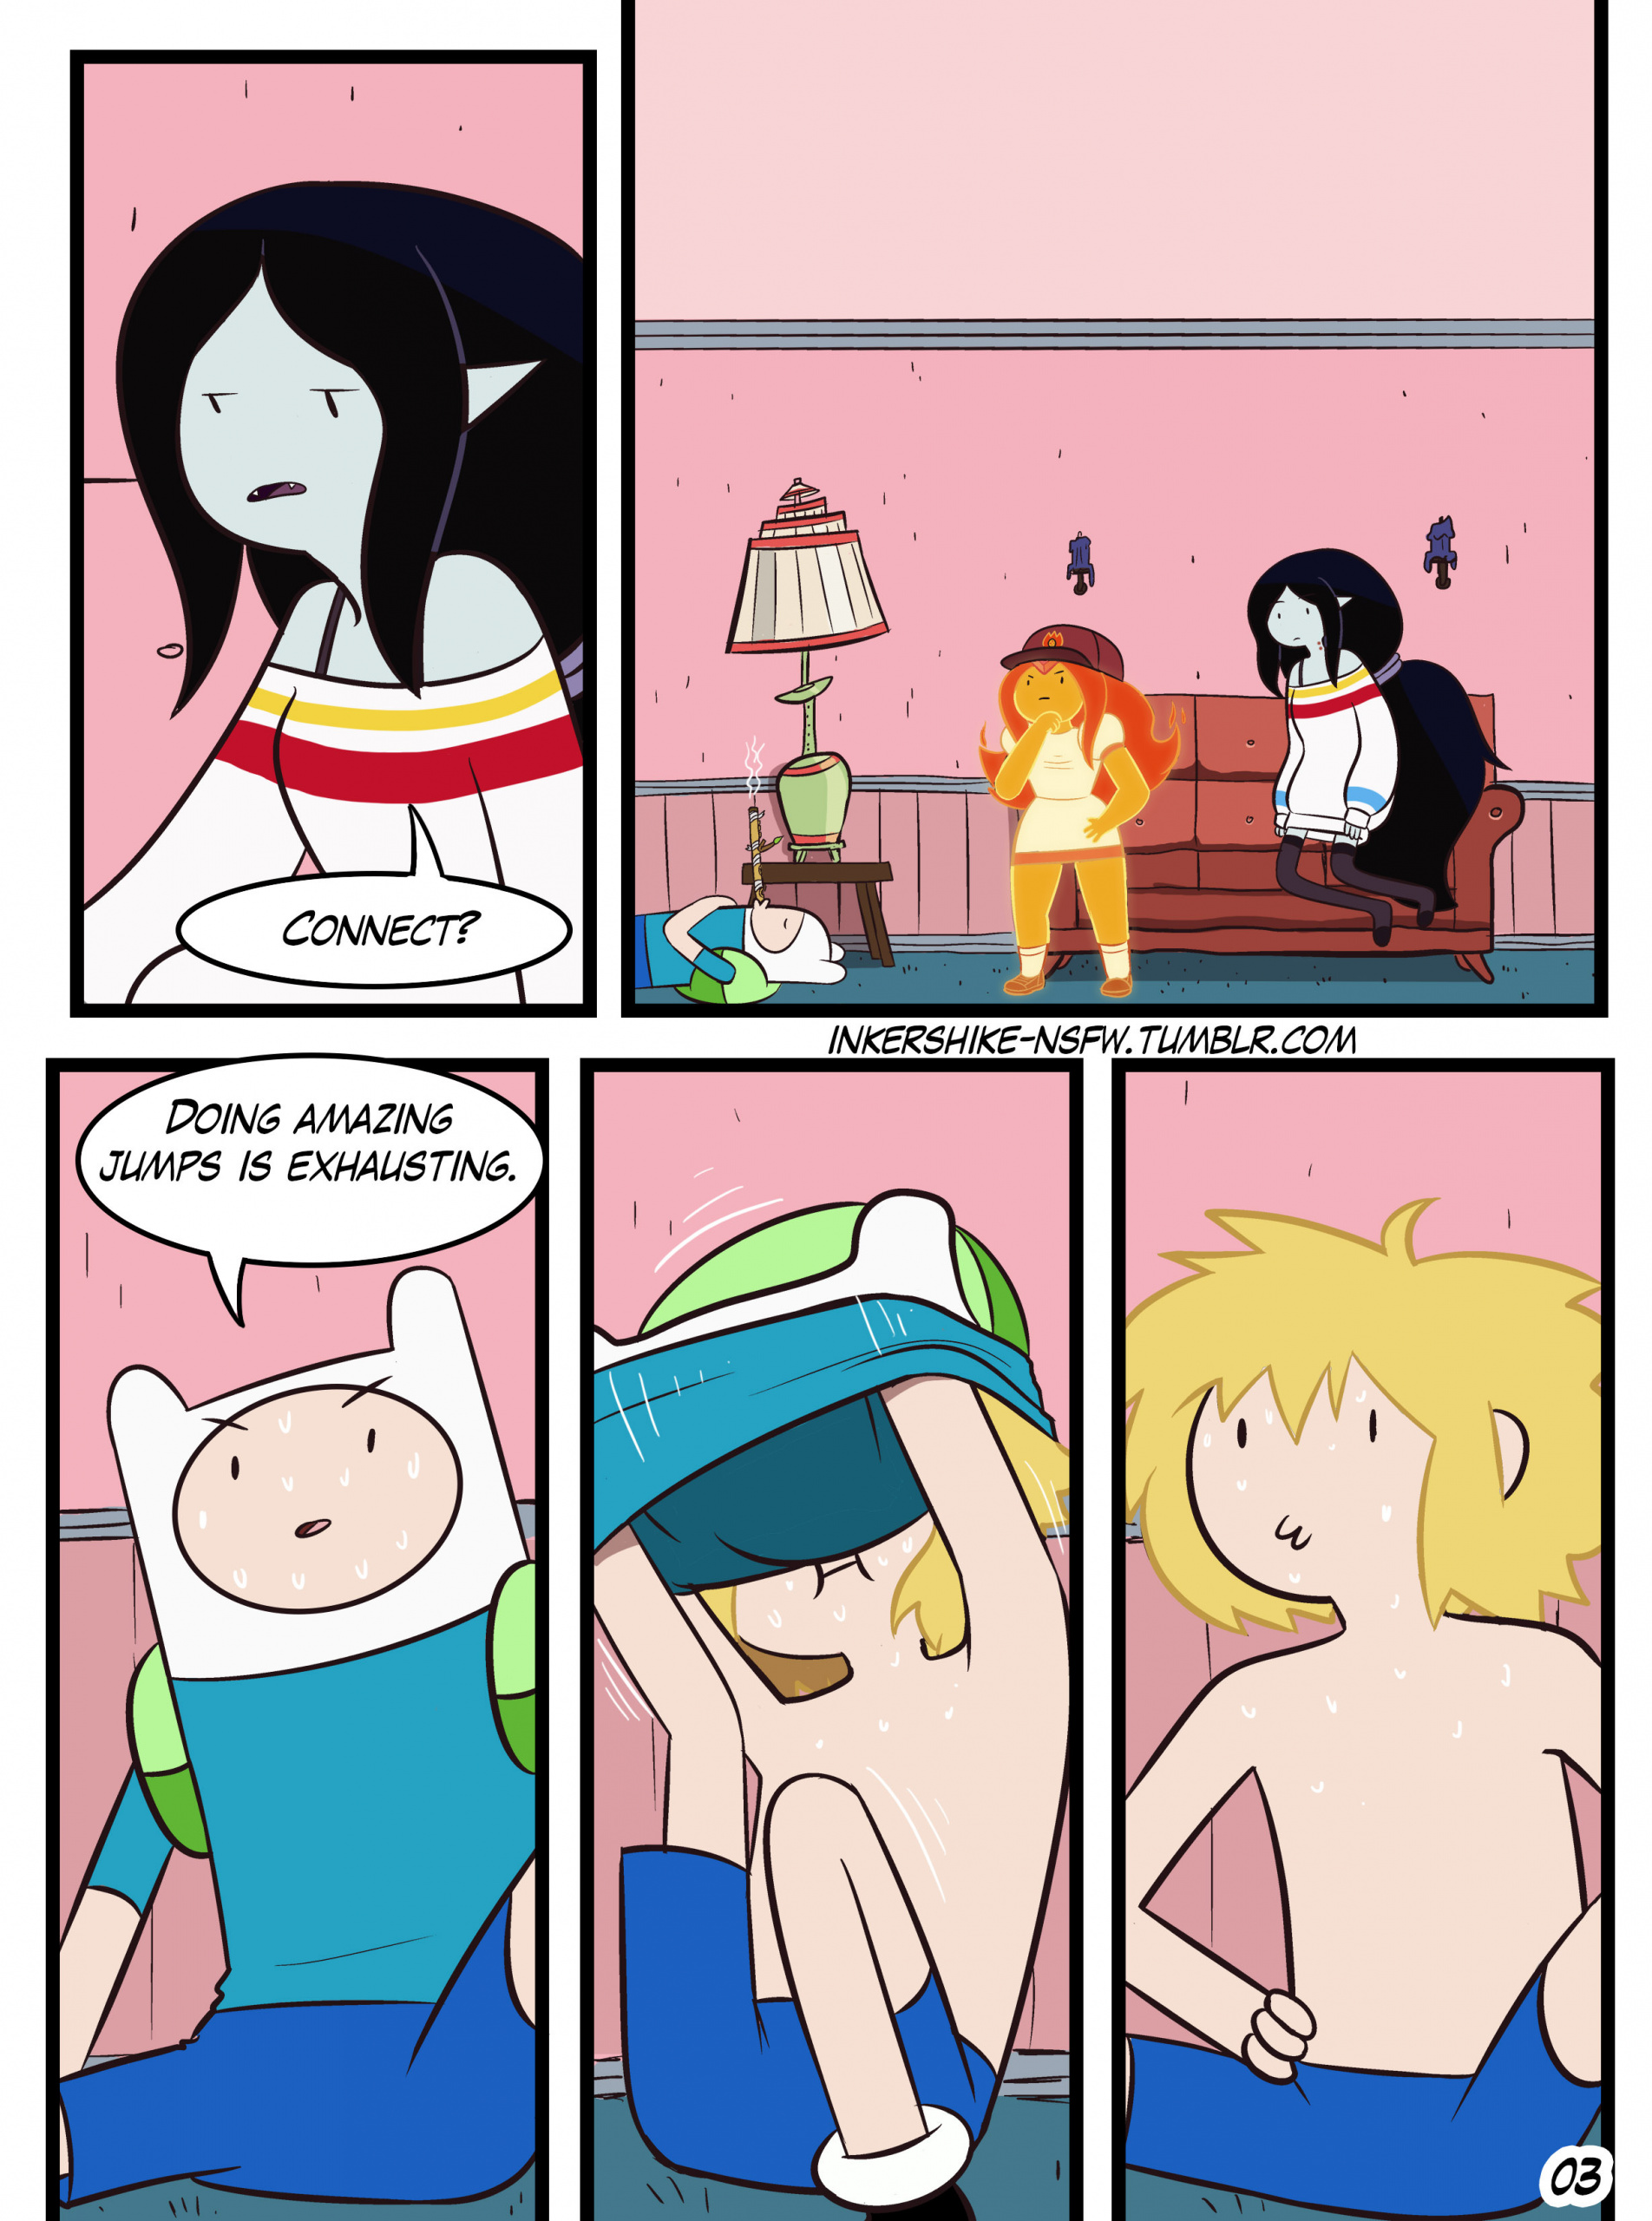 Adventure time: Practice With The Band porn comics Oral sex, Blowjob, Creampie, Cum Swallow, Deepthroat, Femdom, Group Sex, Lolicon, Masturbation, Monster Girls, Stockings, Straight, Straight Shota, X-Ray